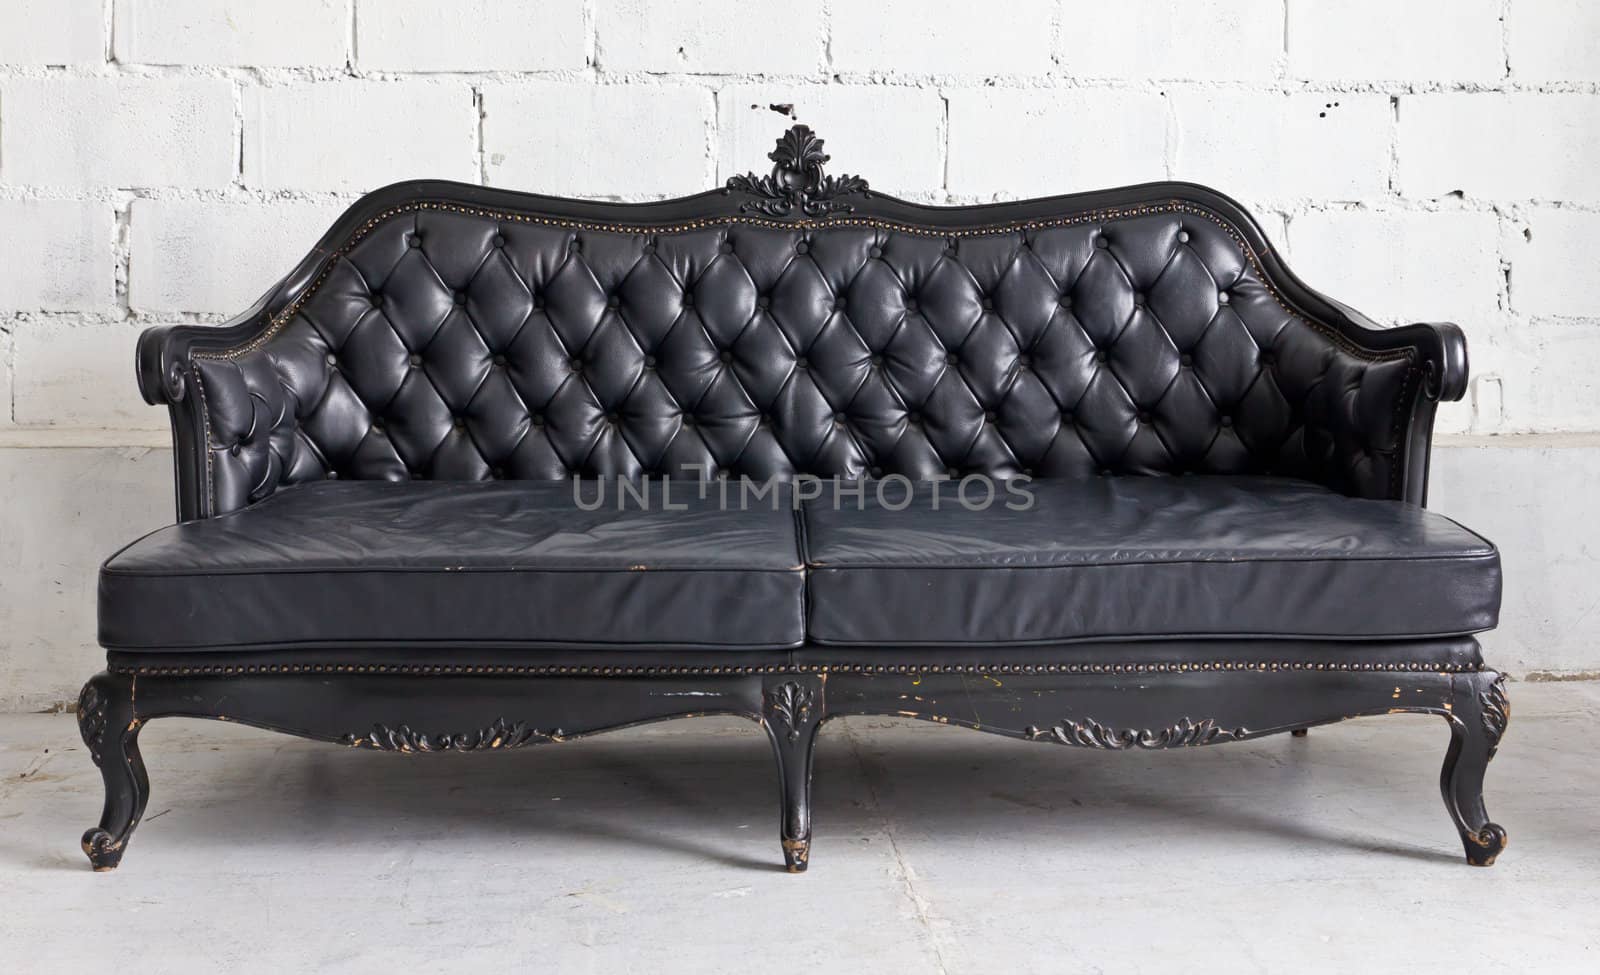 black vintage armchair in white room by tungphoto